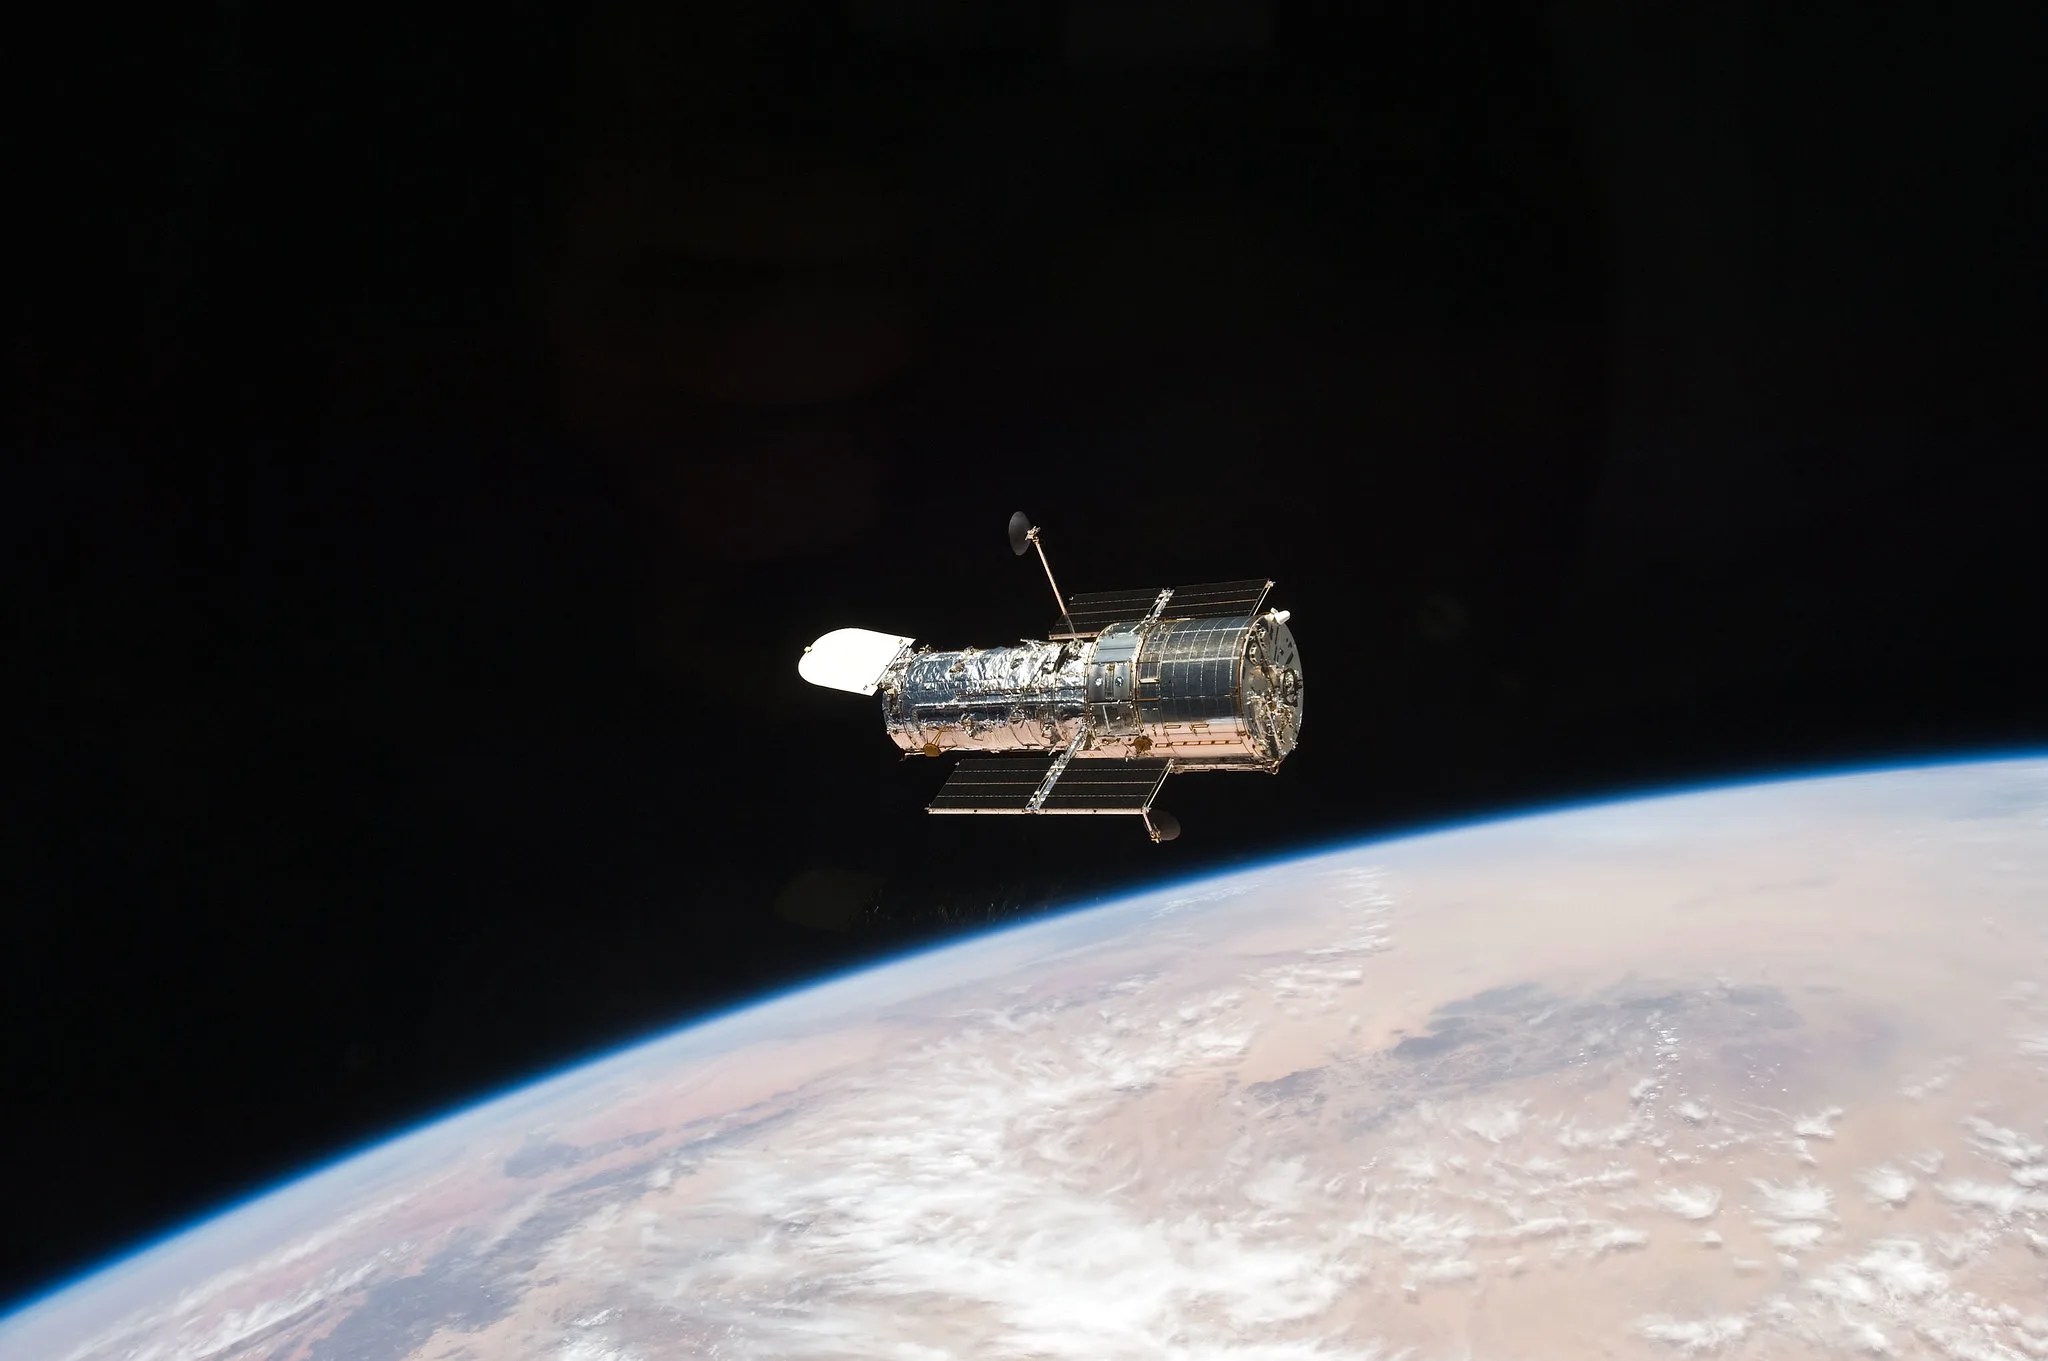 Photograph of the Hubble Space Telescope over Earth.